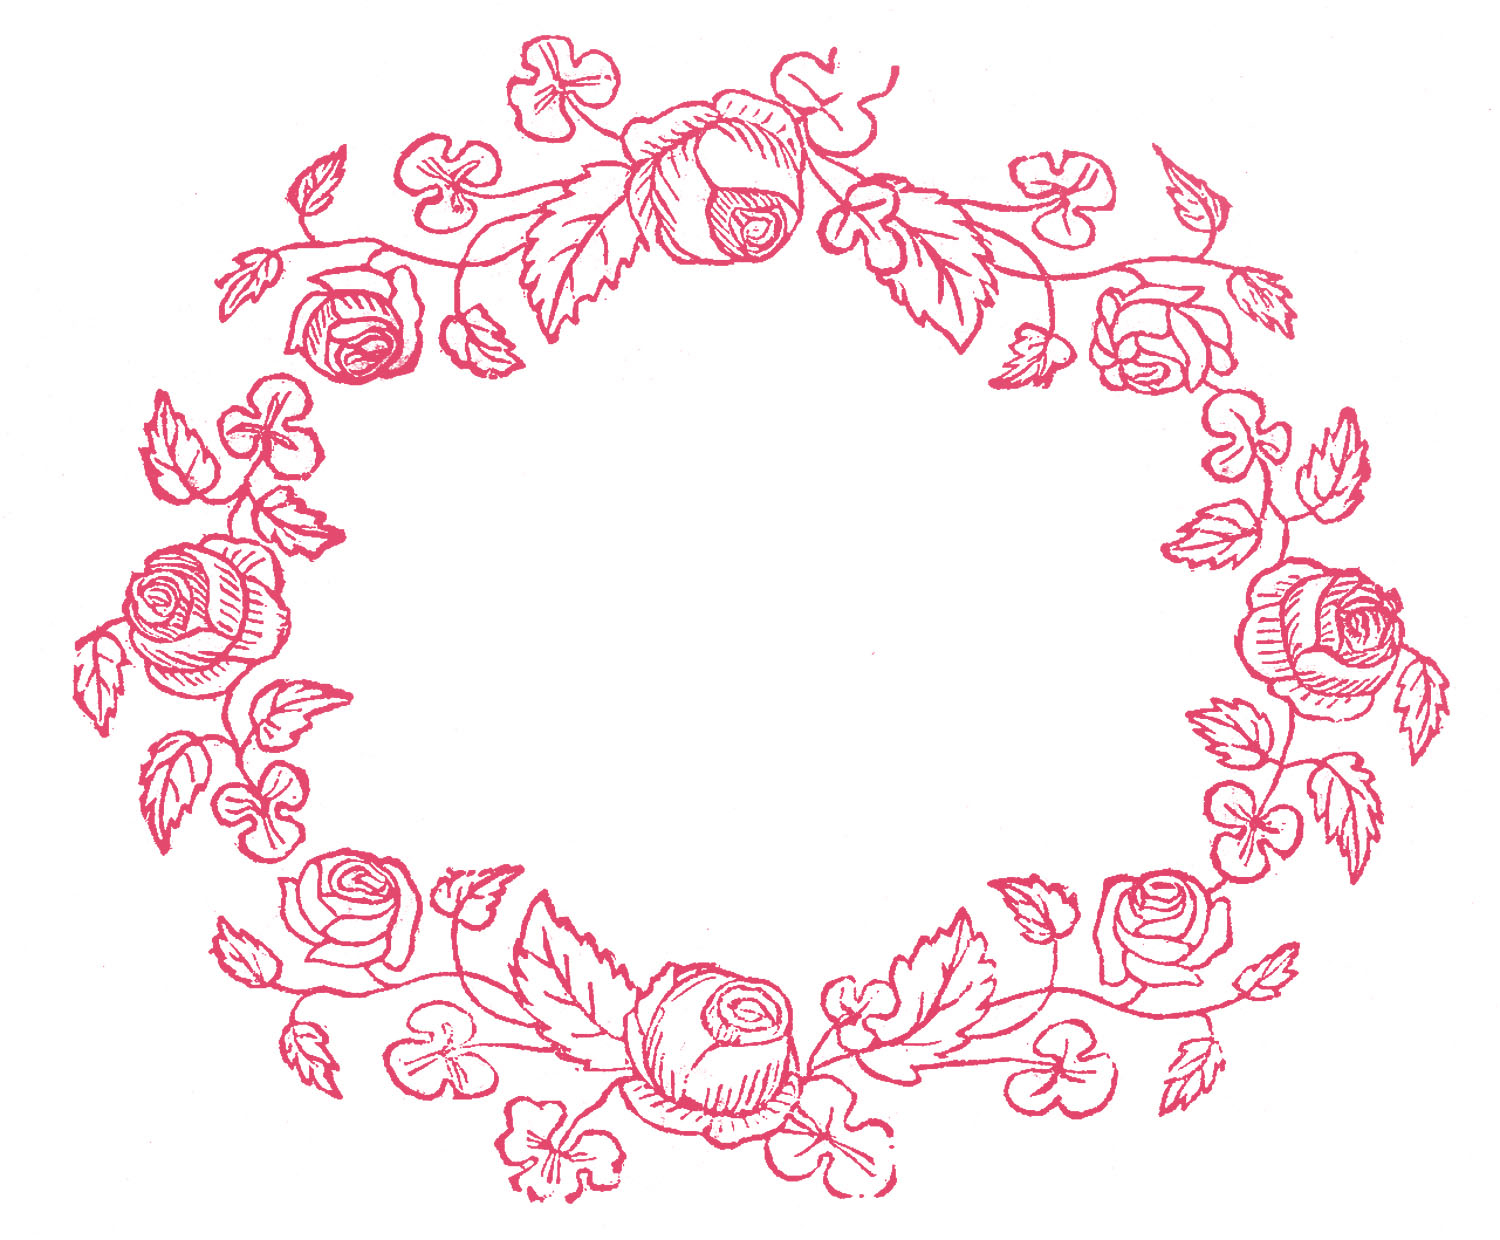 Embroidery Patterns Free Royalty Free Images Rose Wreaths Embroidery Pattern The